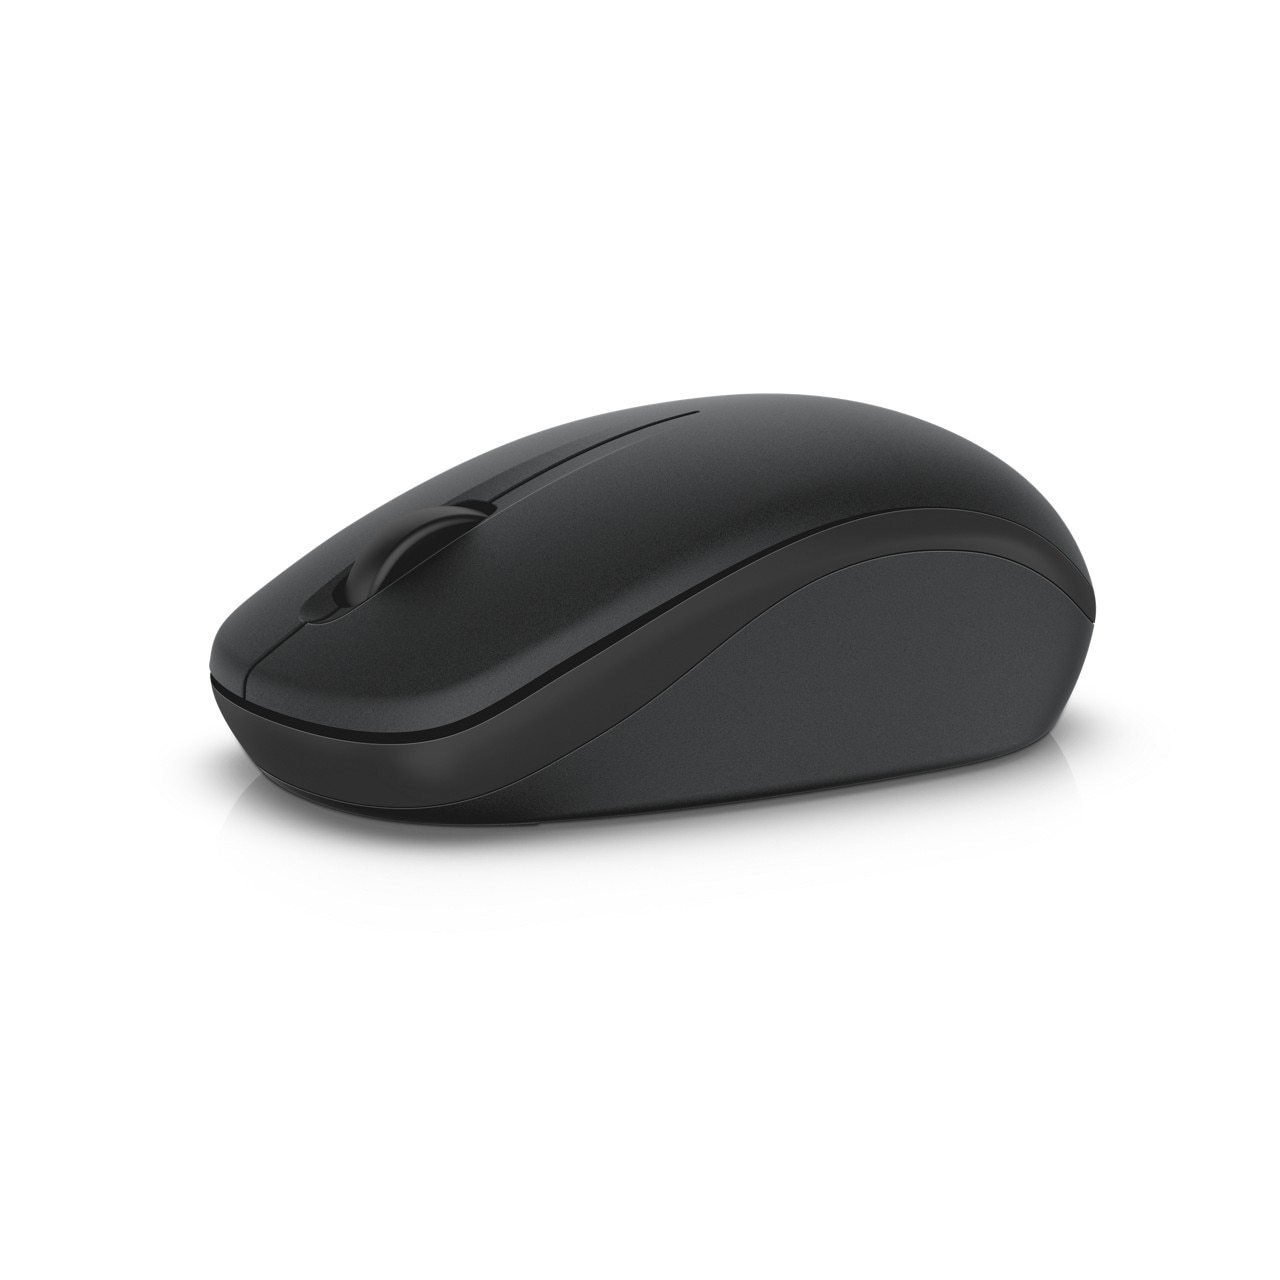 2.4 ghz wireless optical mouse drivers download for windows 7